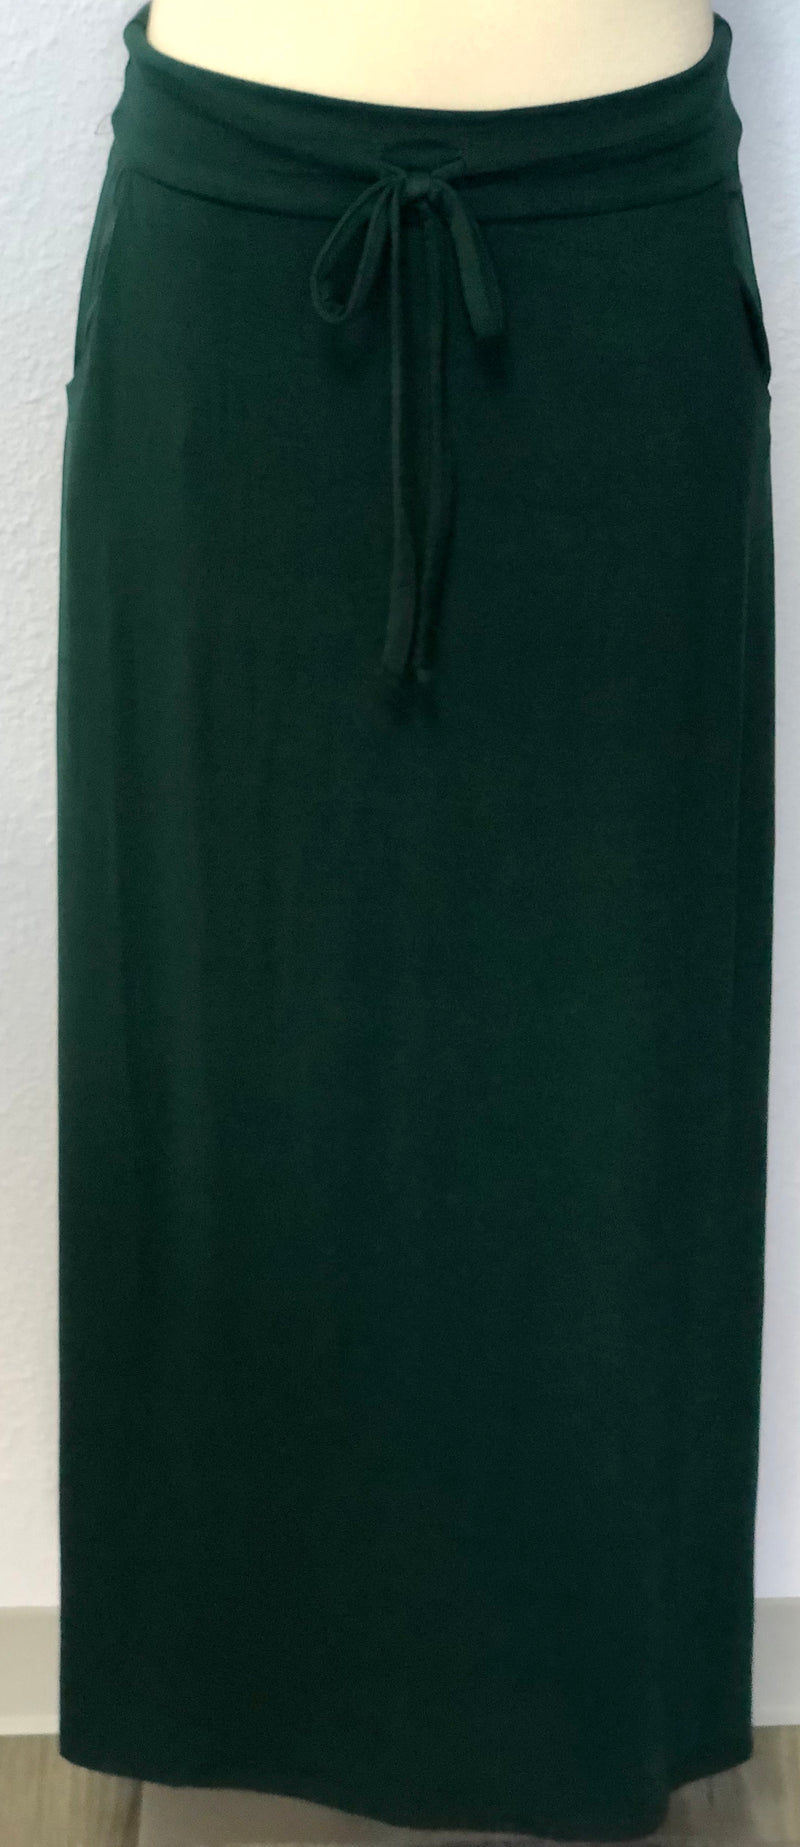 RELAXED FIT MAXI SKIRT